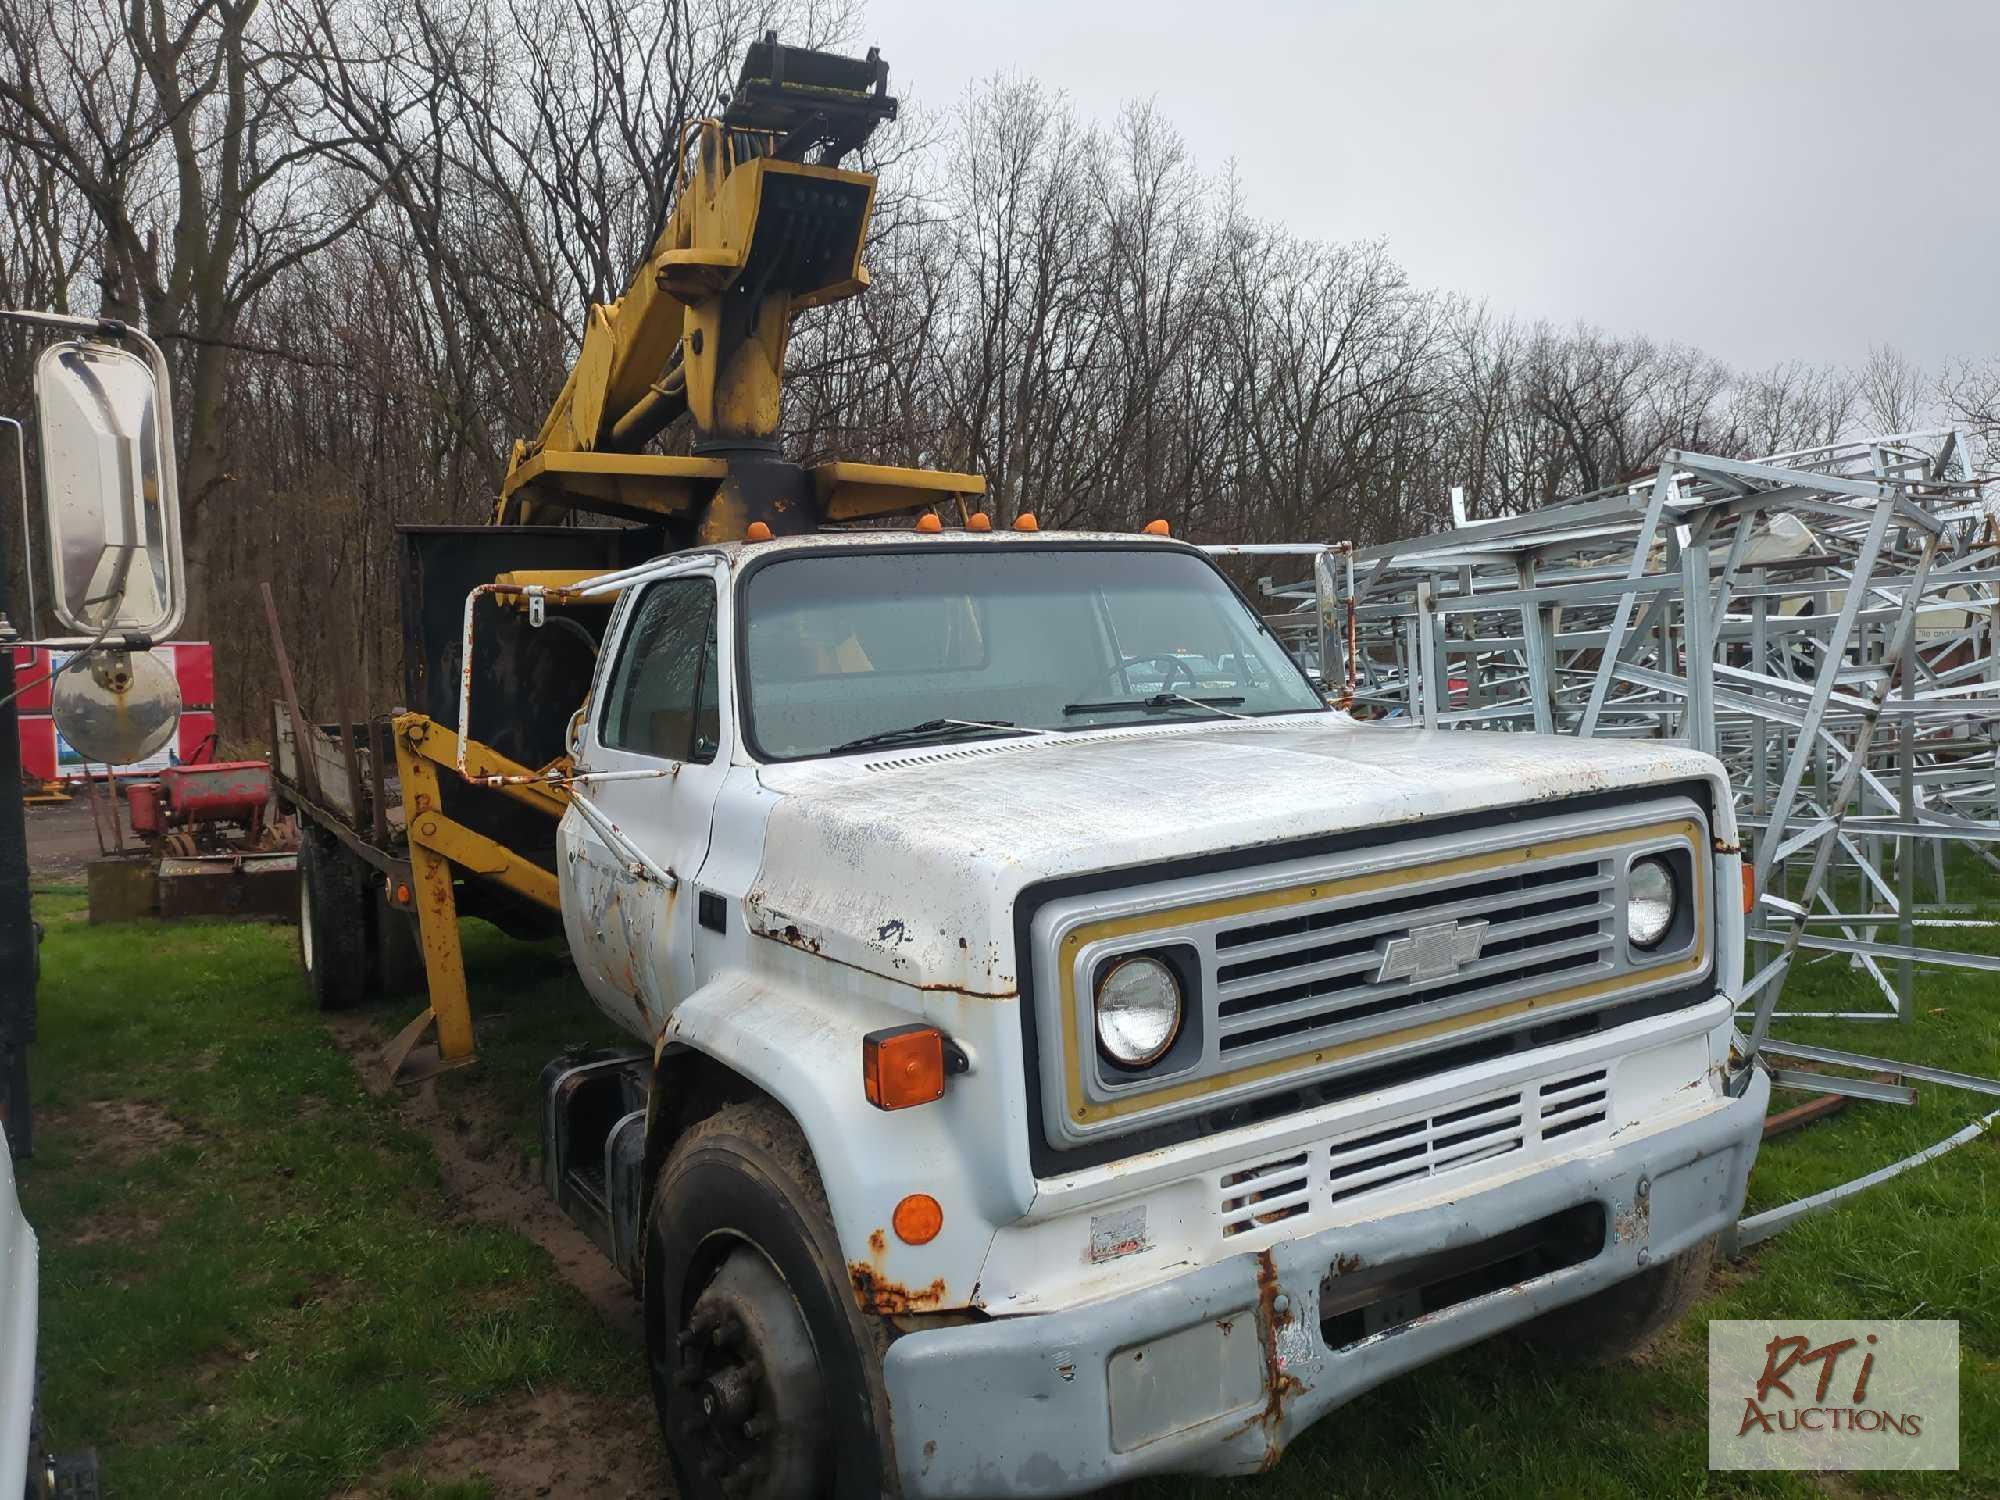 Chevy 7000 single axle flatbed grapple truck, with John Deere log grapple, outriggers, 5-speed